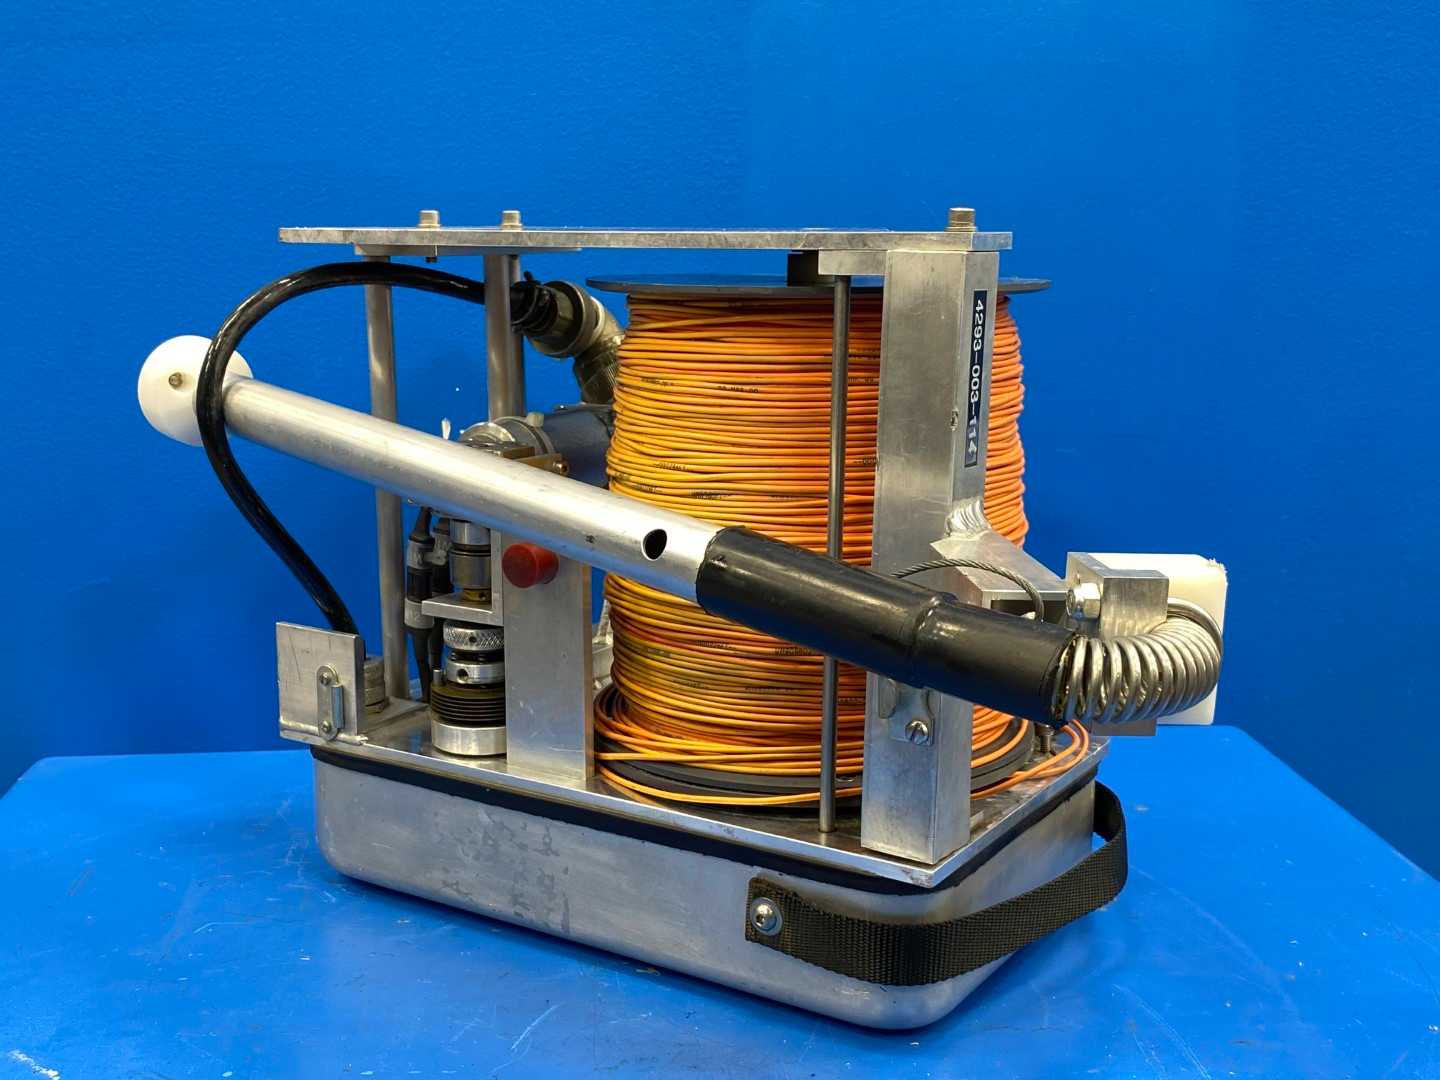 Linear Polarized LP00 Fiber optic cable reel w/ NEW cable Engel / Tiny-Lutch